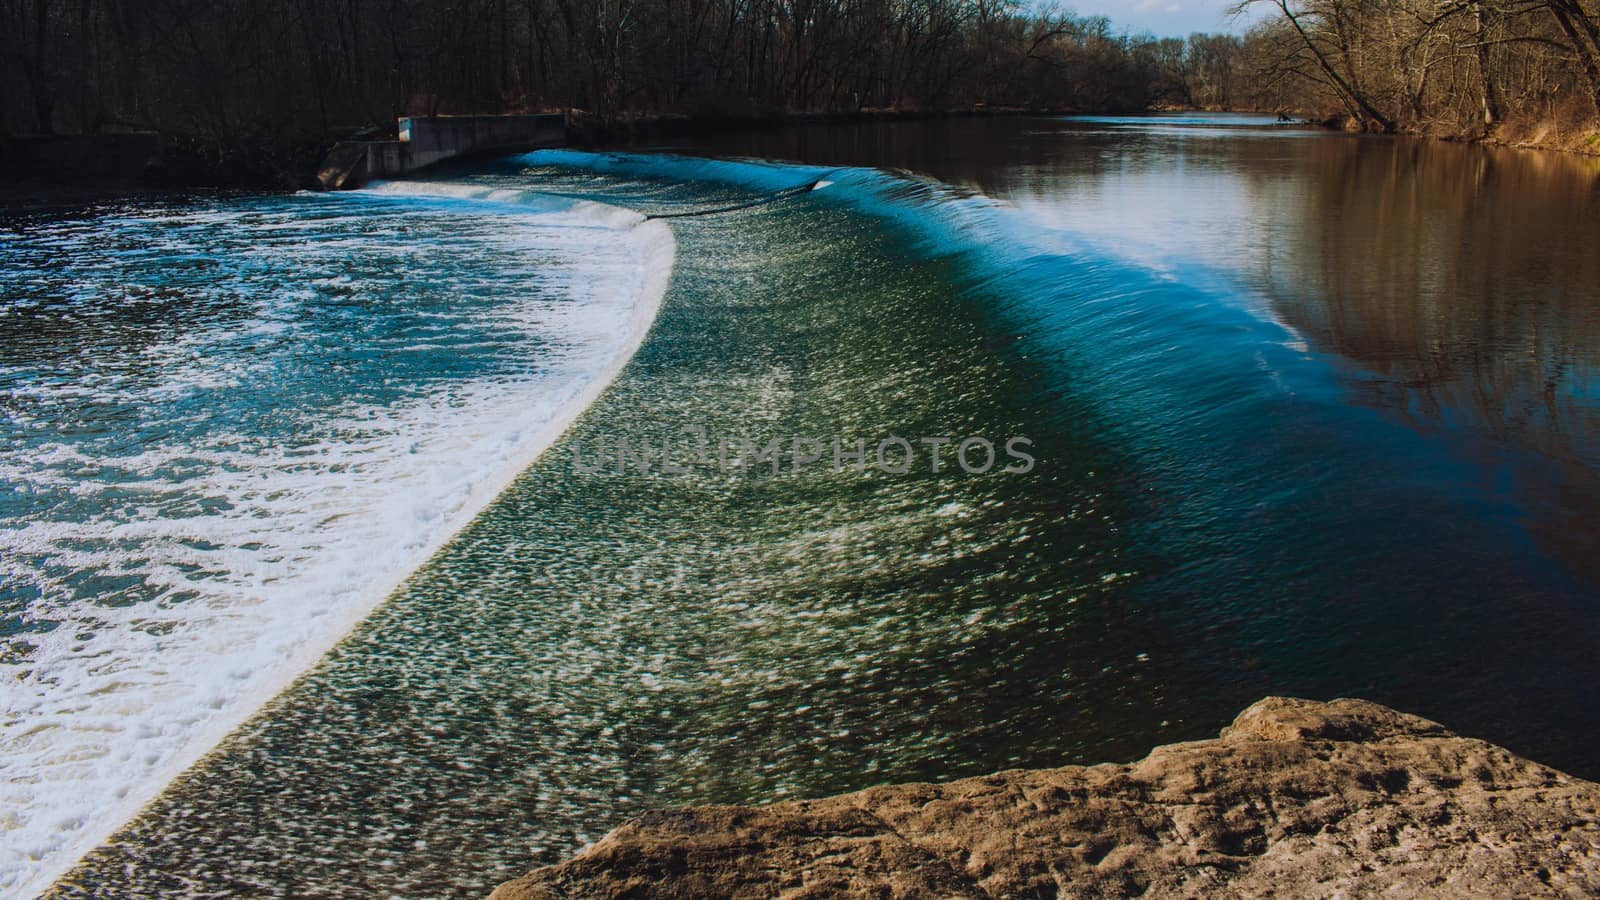 Fast Flowing Water Crashing Over a Man-Made Dam in a Dead Winter Forest